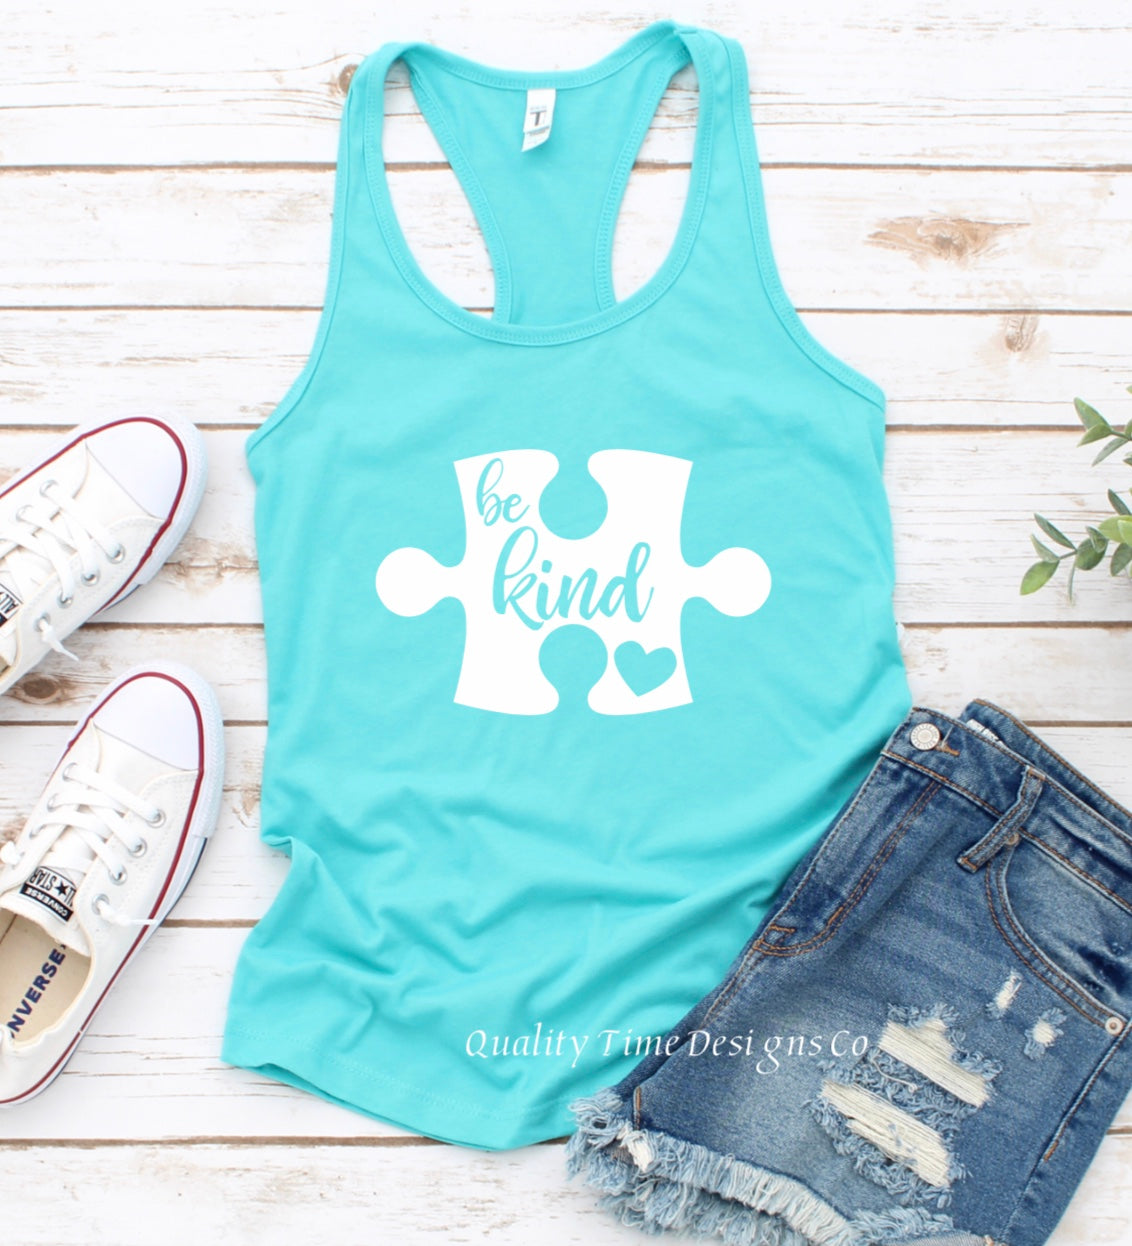 Be kind puzzle piece tank top